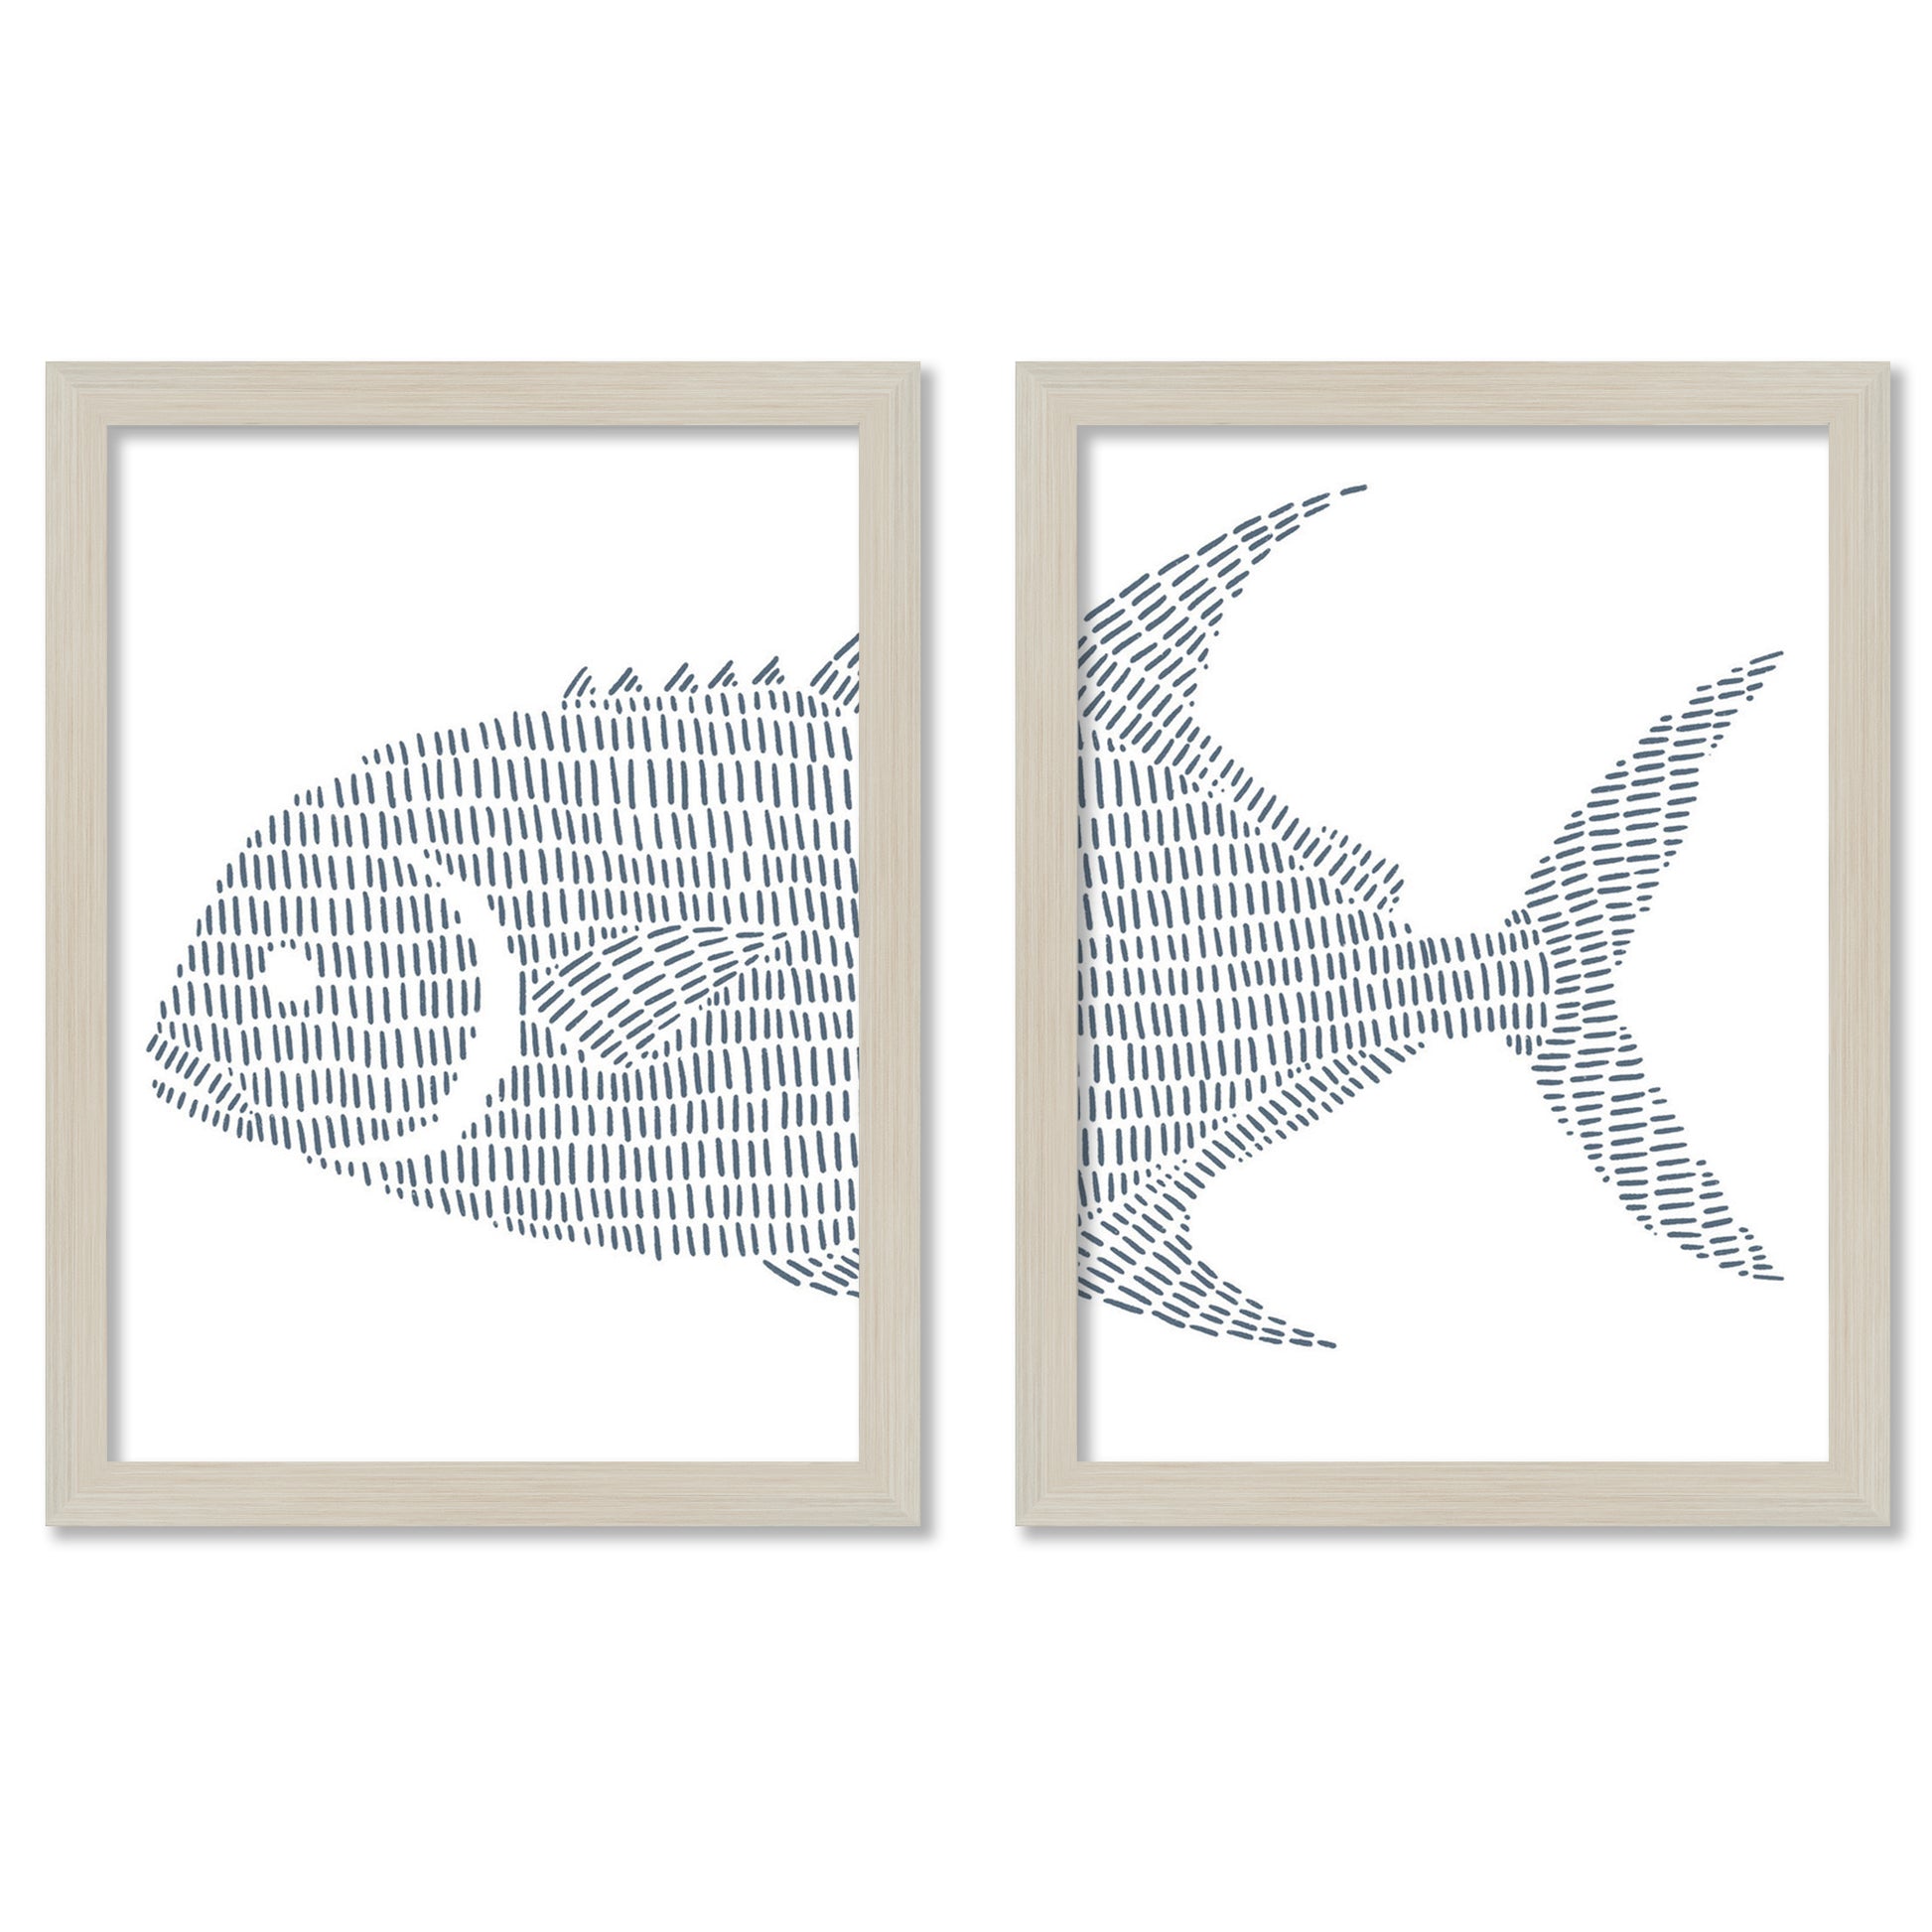 Fish Stripes by Jetty Home - 2 Piece Gallery Framed Print Art Set